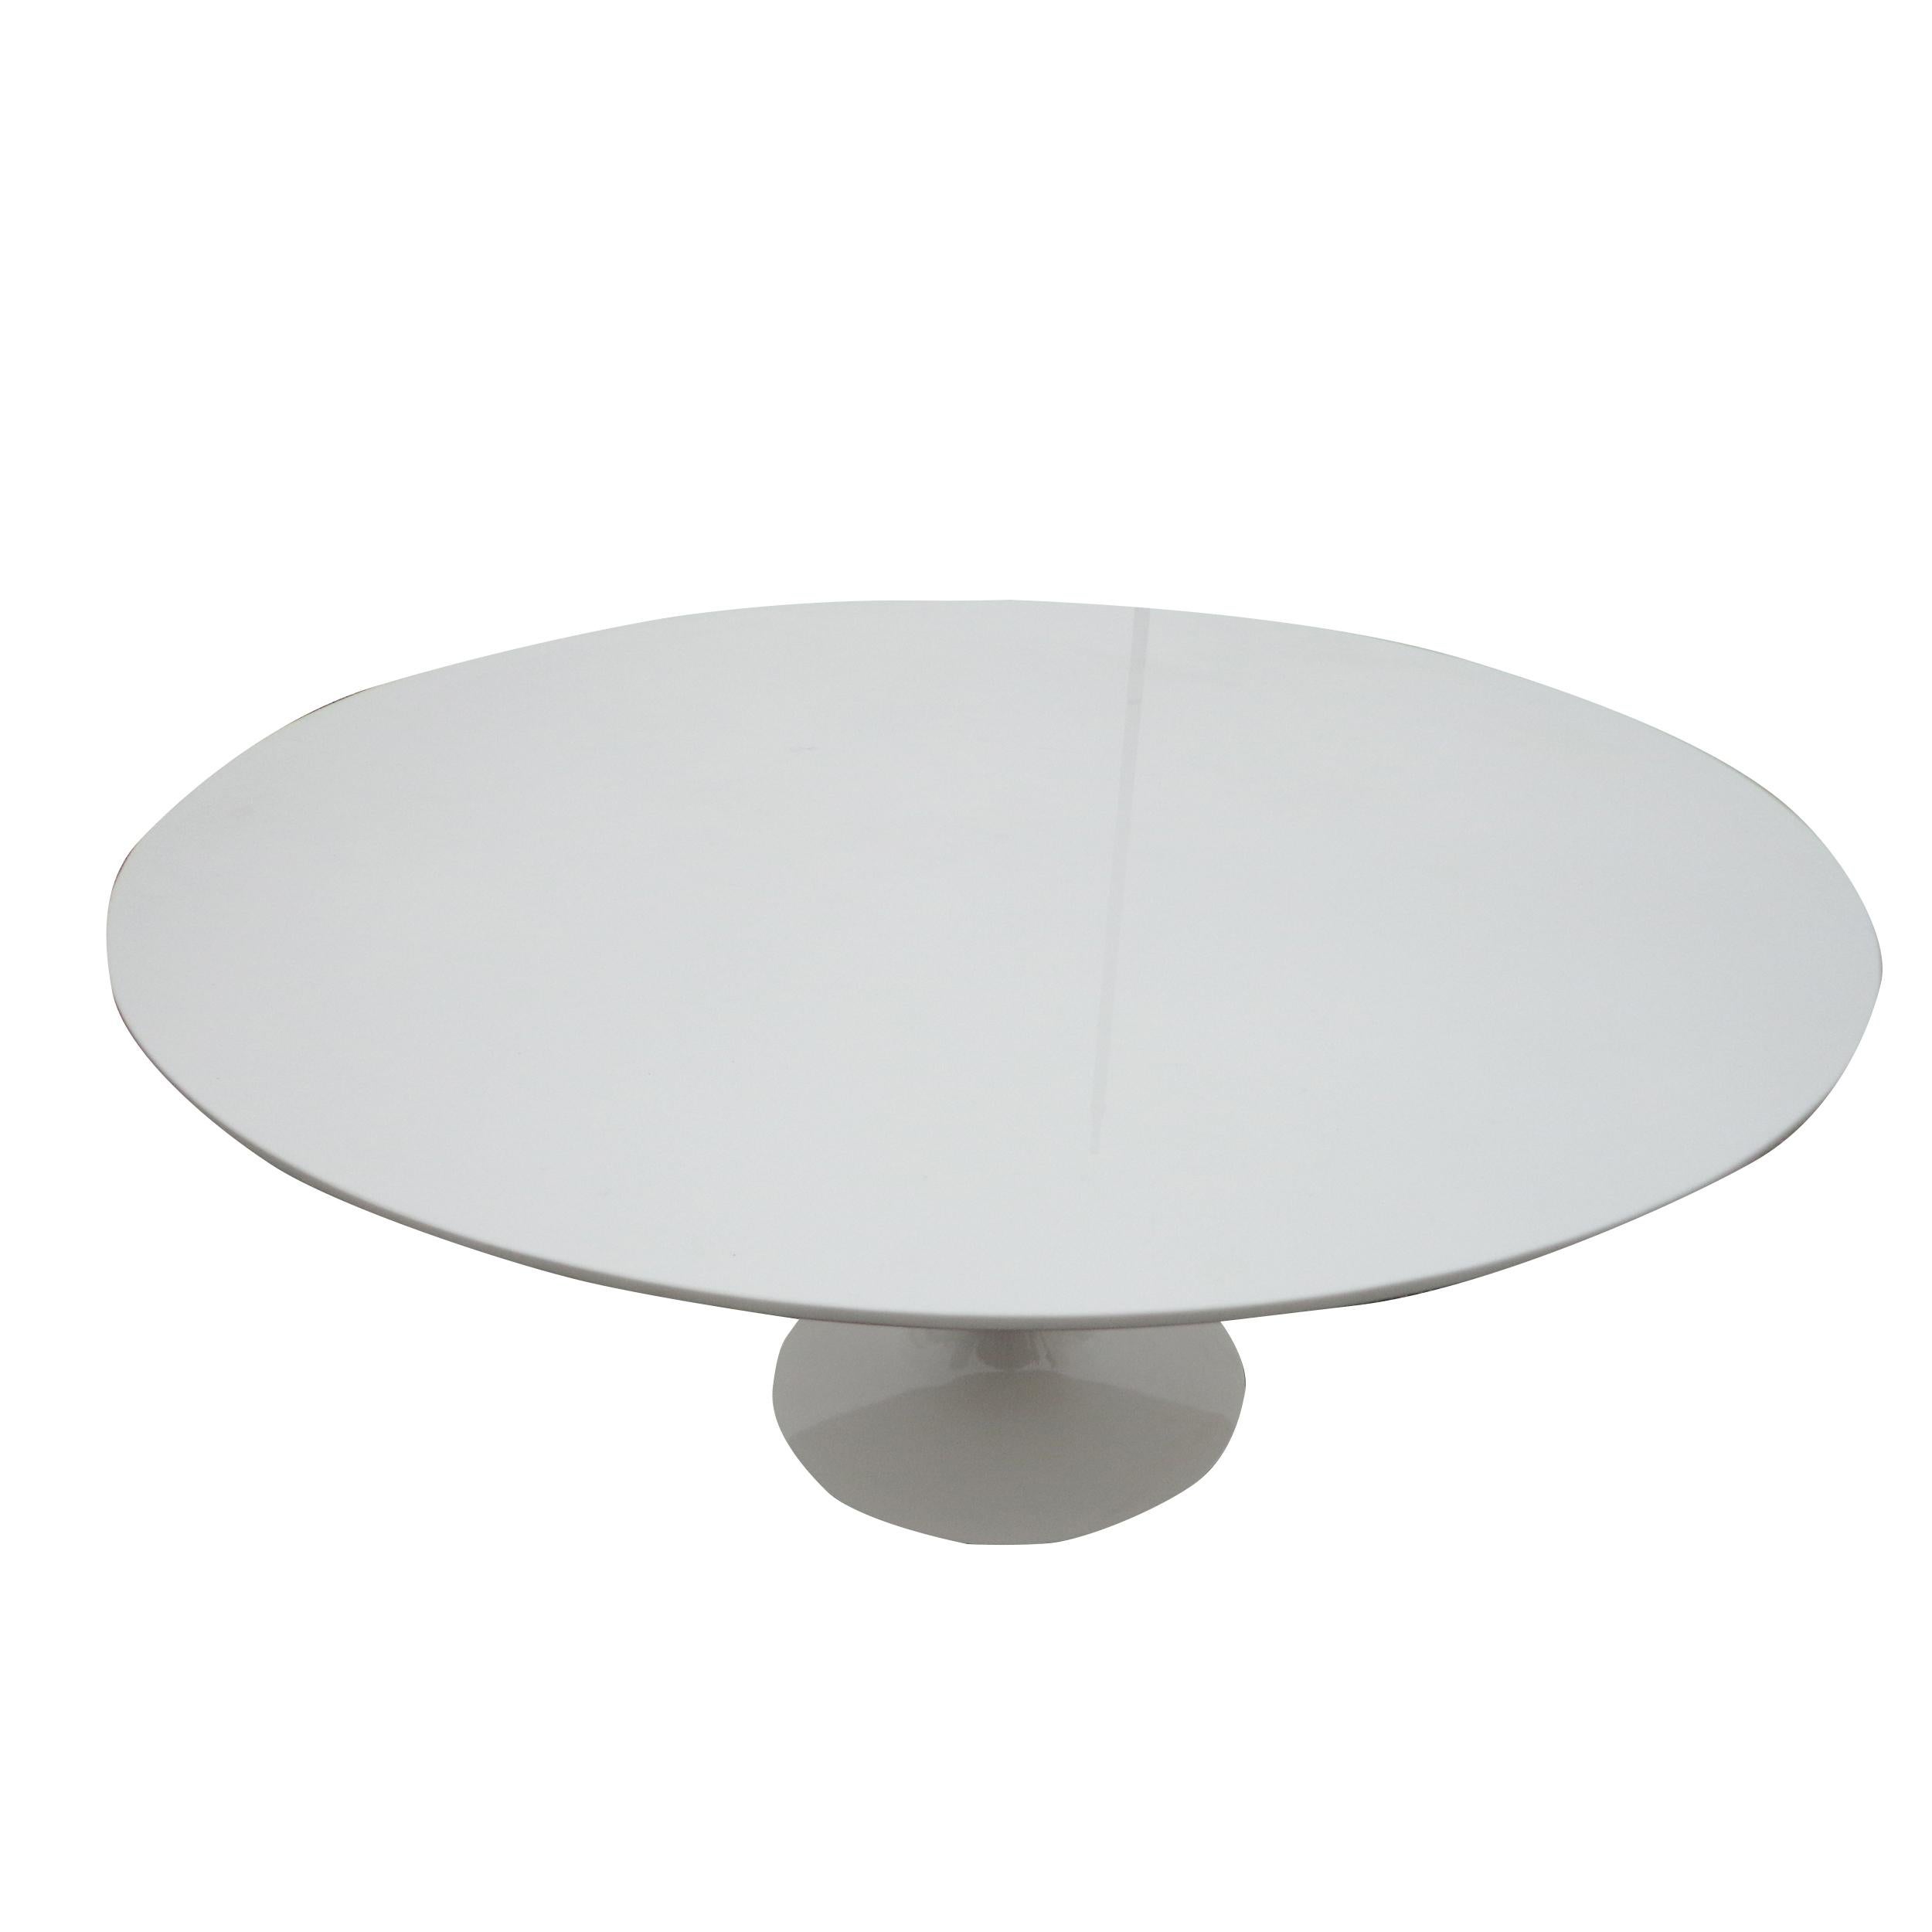 60? Knoll Saarinen table with custom top

Iconic, classic vintage table designed by Eero Saarinen for Knoll International. 
Custom ceramic top. In very good original condition, showing light cosmetic wear, normal and consistent with age.
 